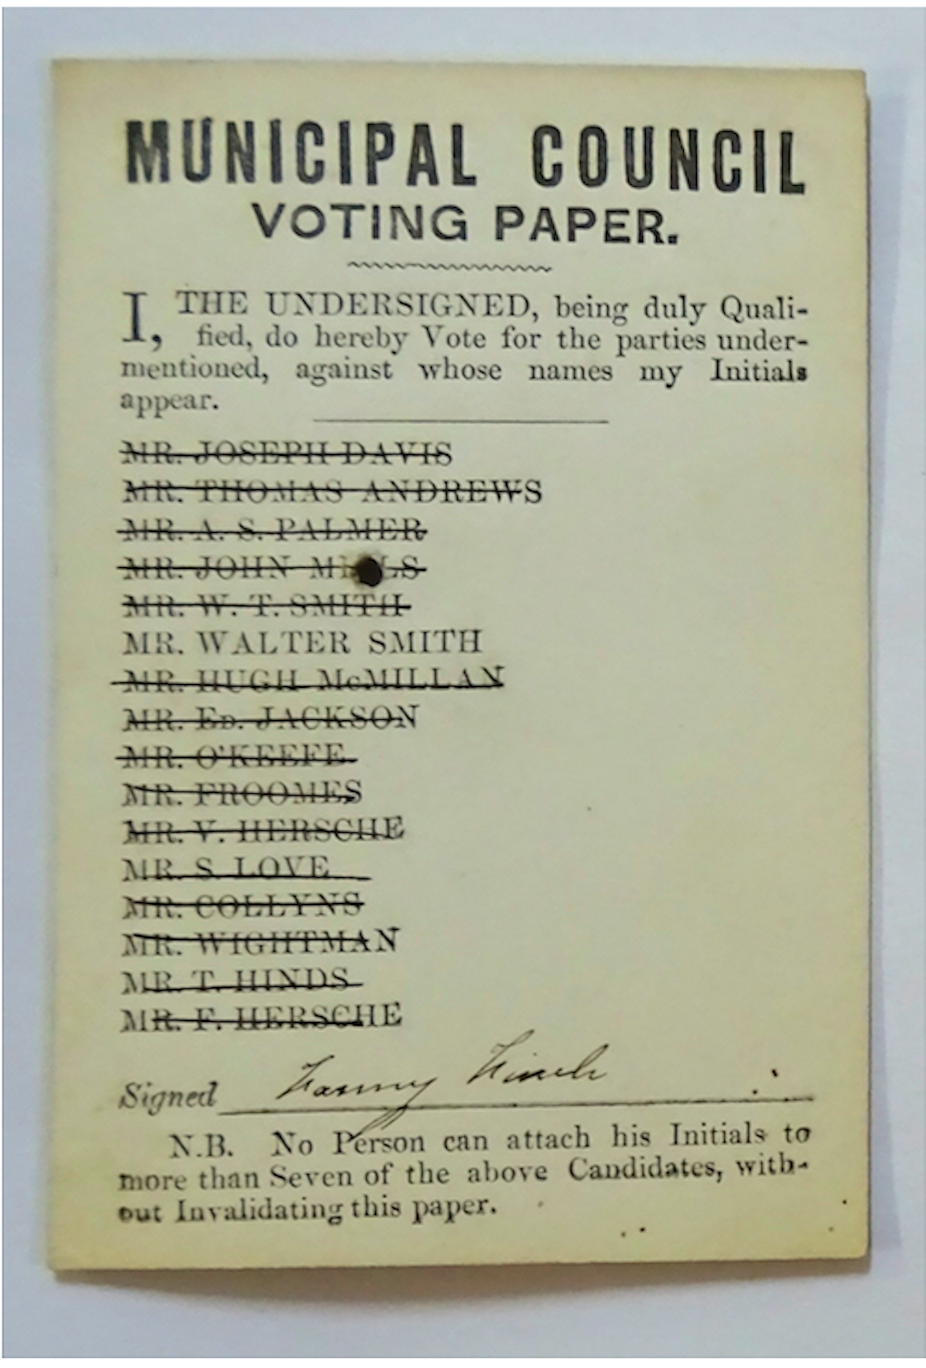 Fanny Finch’s 1856 voting card.